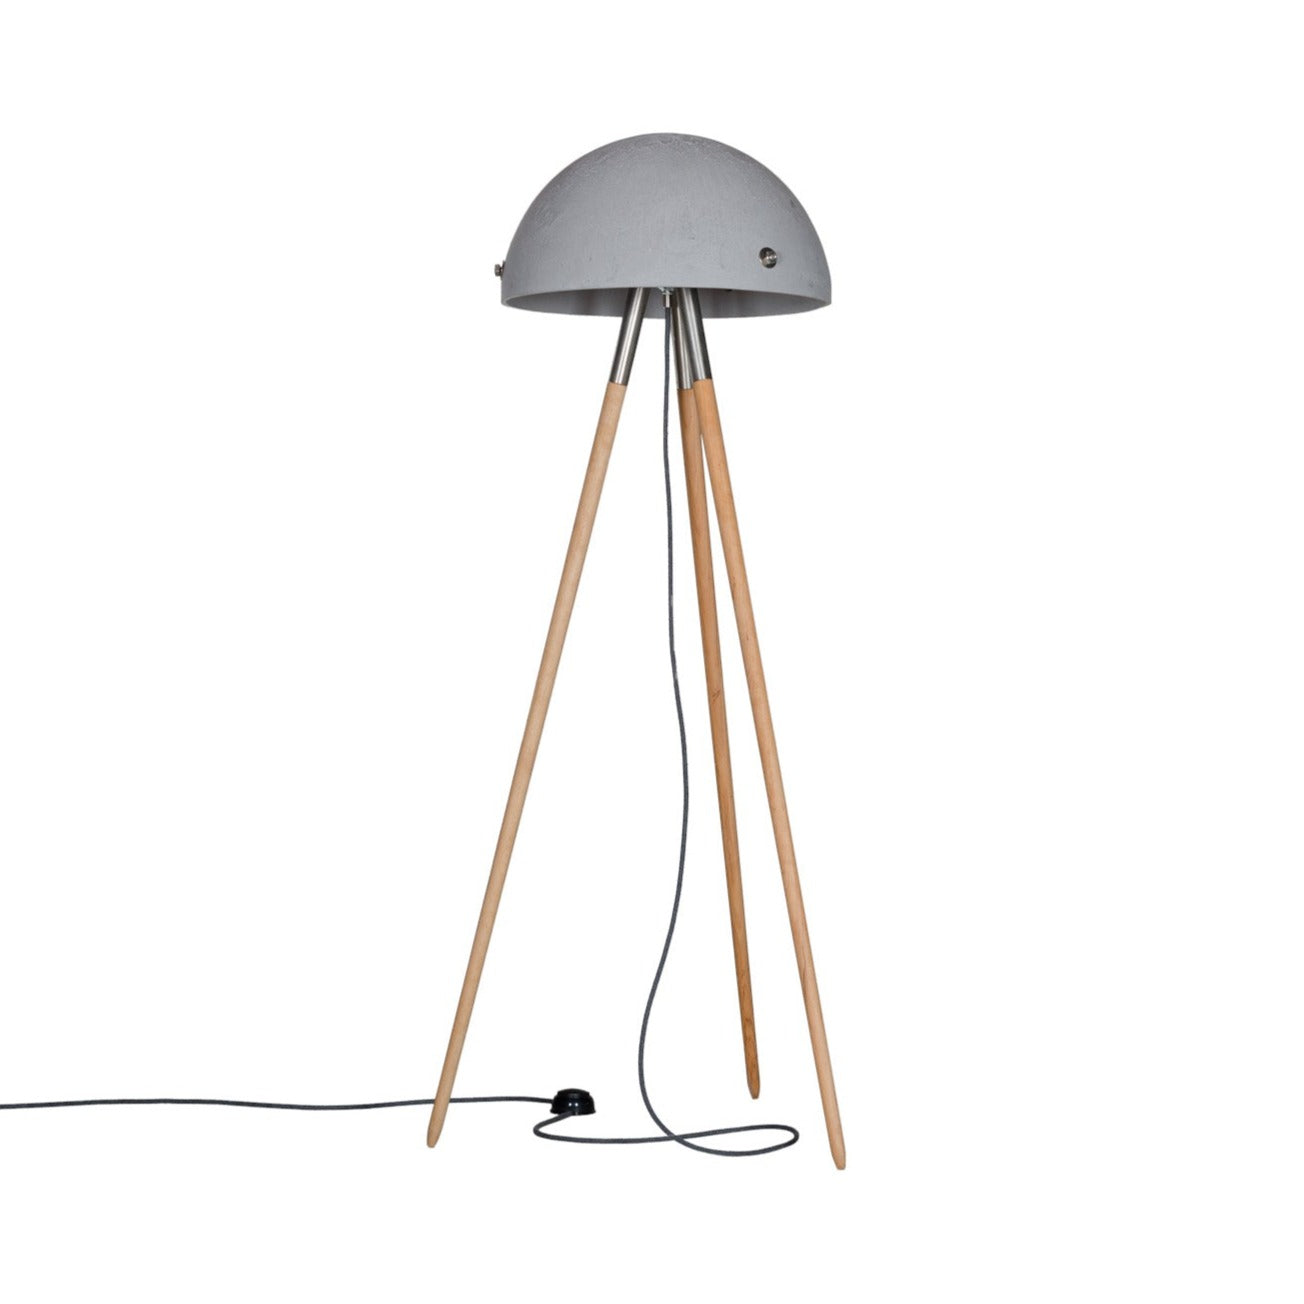 The Floor sphere is an industrial lamp with a hand -made concrete lampshade made in a selected color. Thanks to this, each interior will gain a perfect shade that will fit into the prevailing decor. Wooden legs, on which the mountain is based with a metal structure, add its factory look. The appropriate proportions of the materials used, despite their massiveness, guarantee that it will complete an elegant way for every home corner.